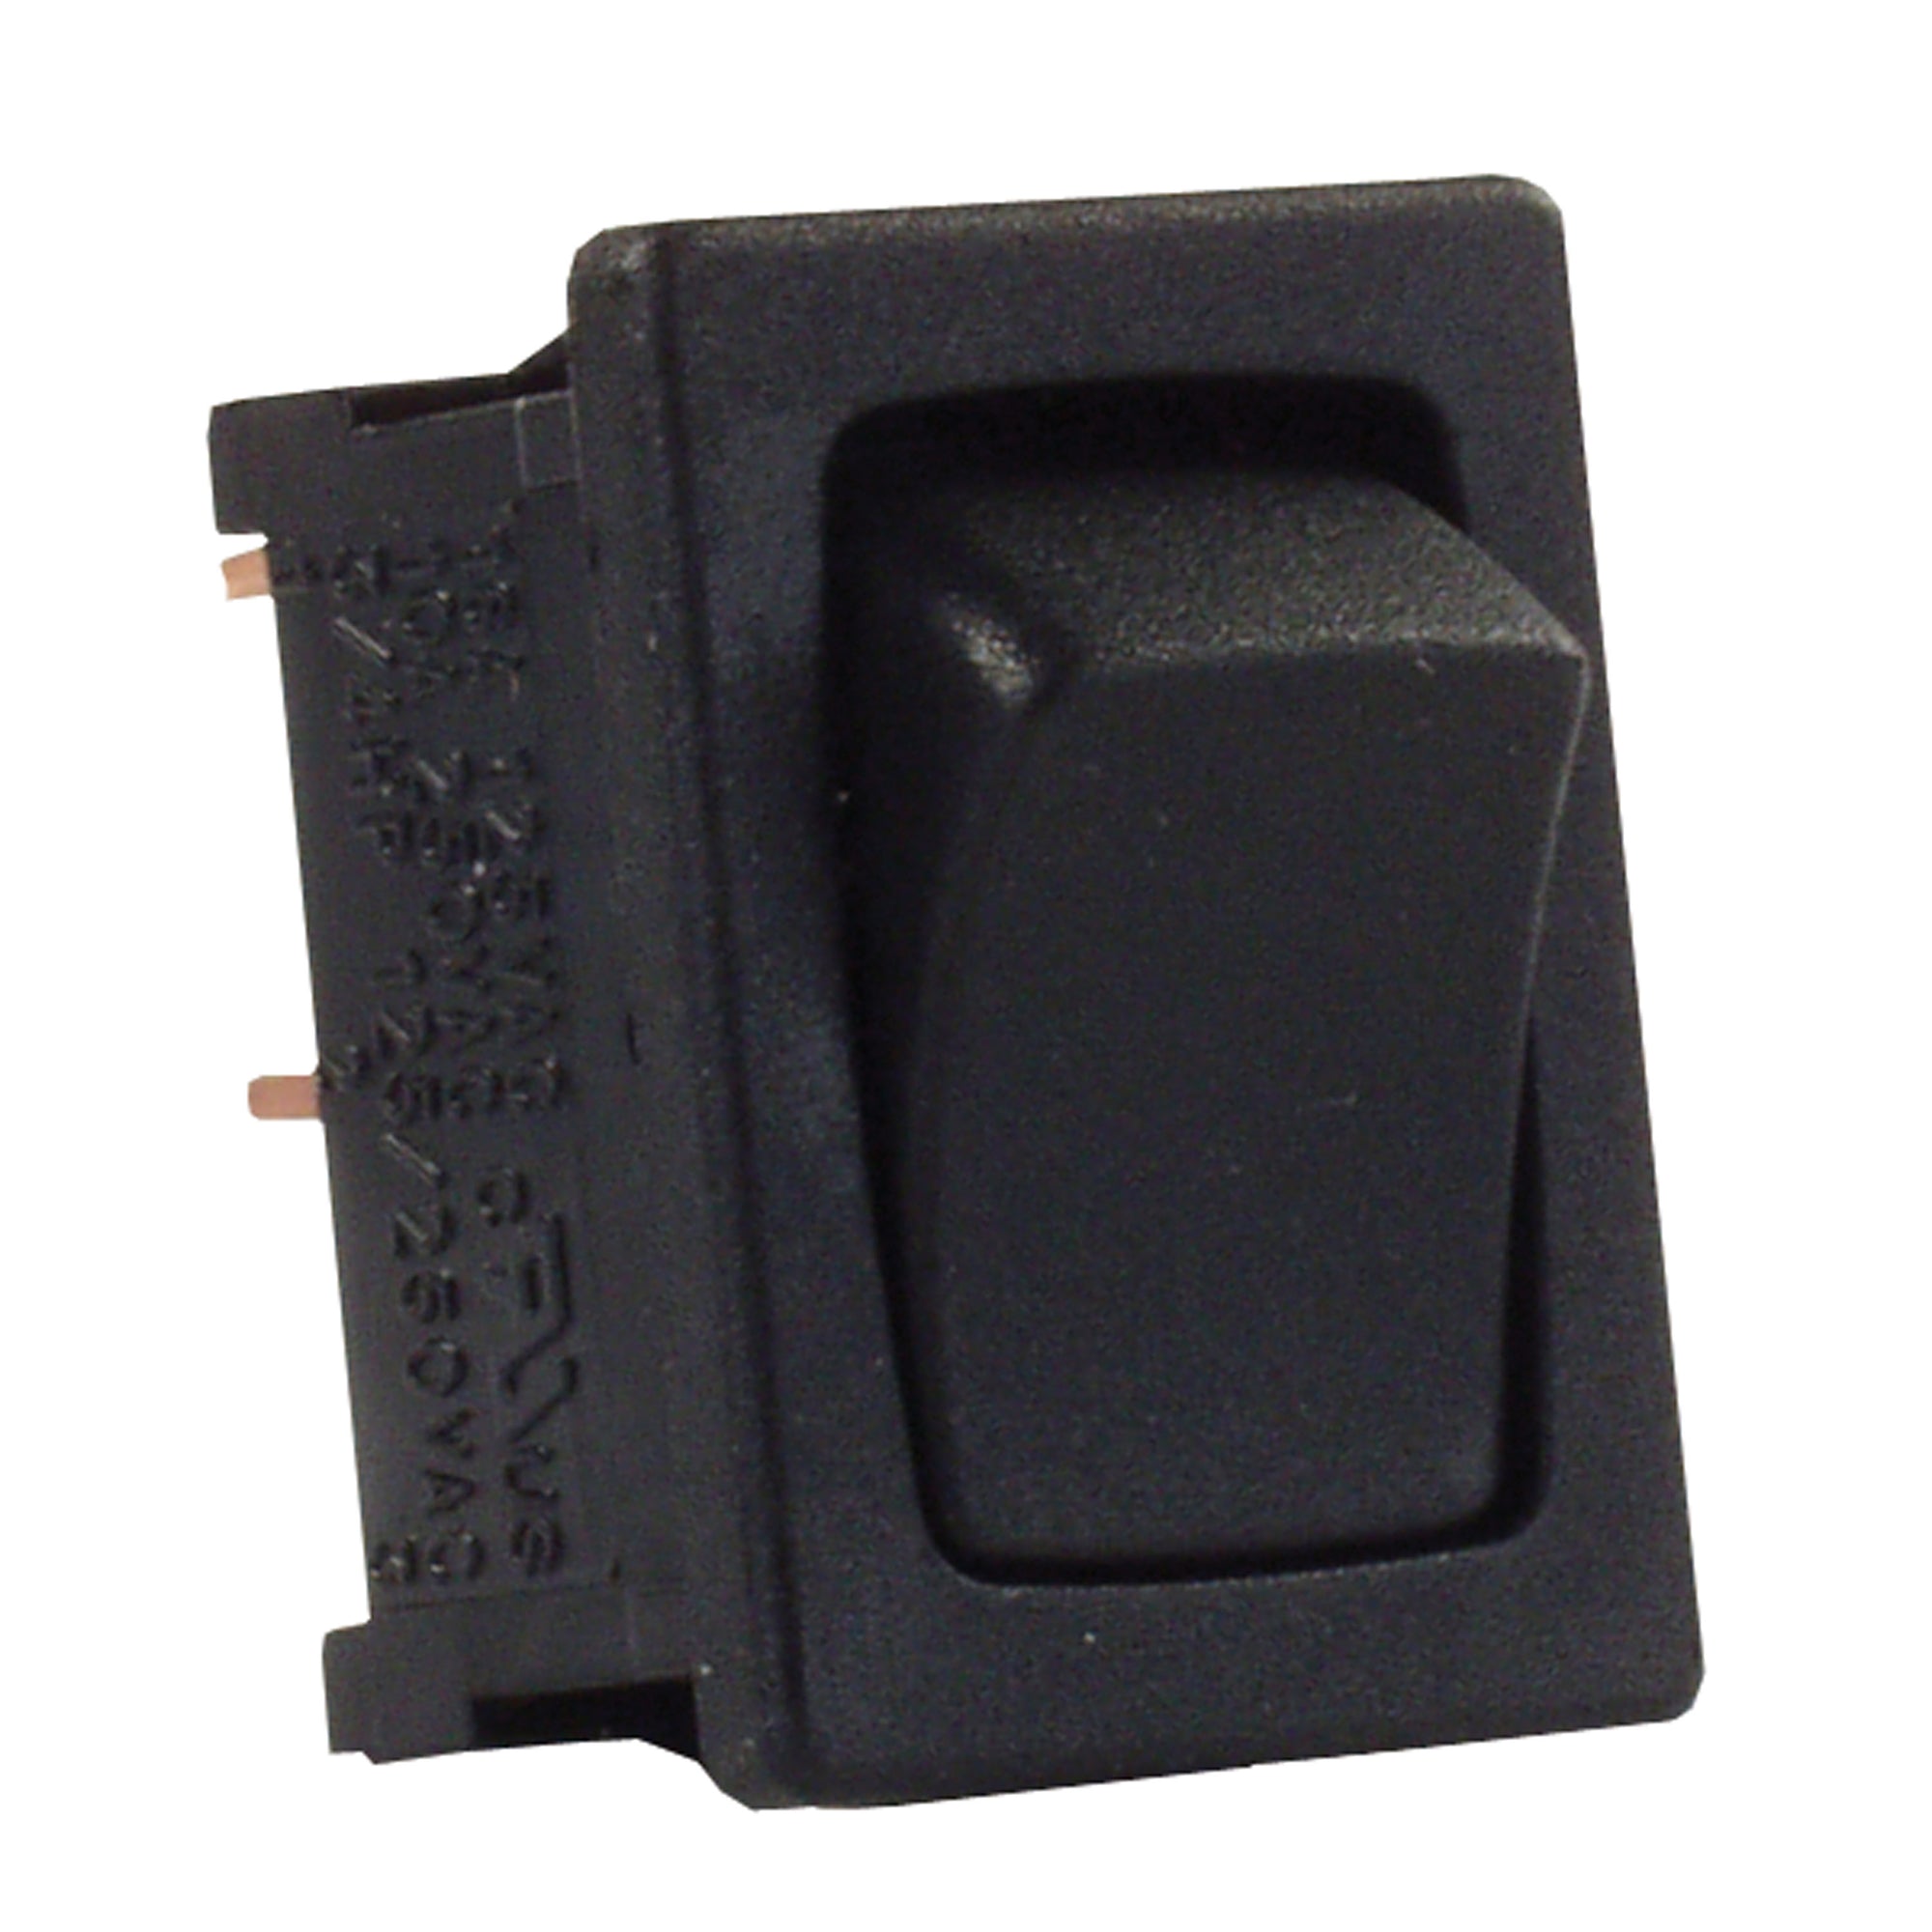 JR Products 12781-5 Mini On/Off Switches, Pack of 5 - Black